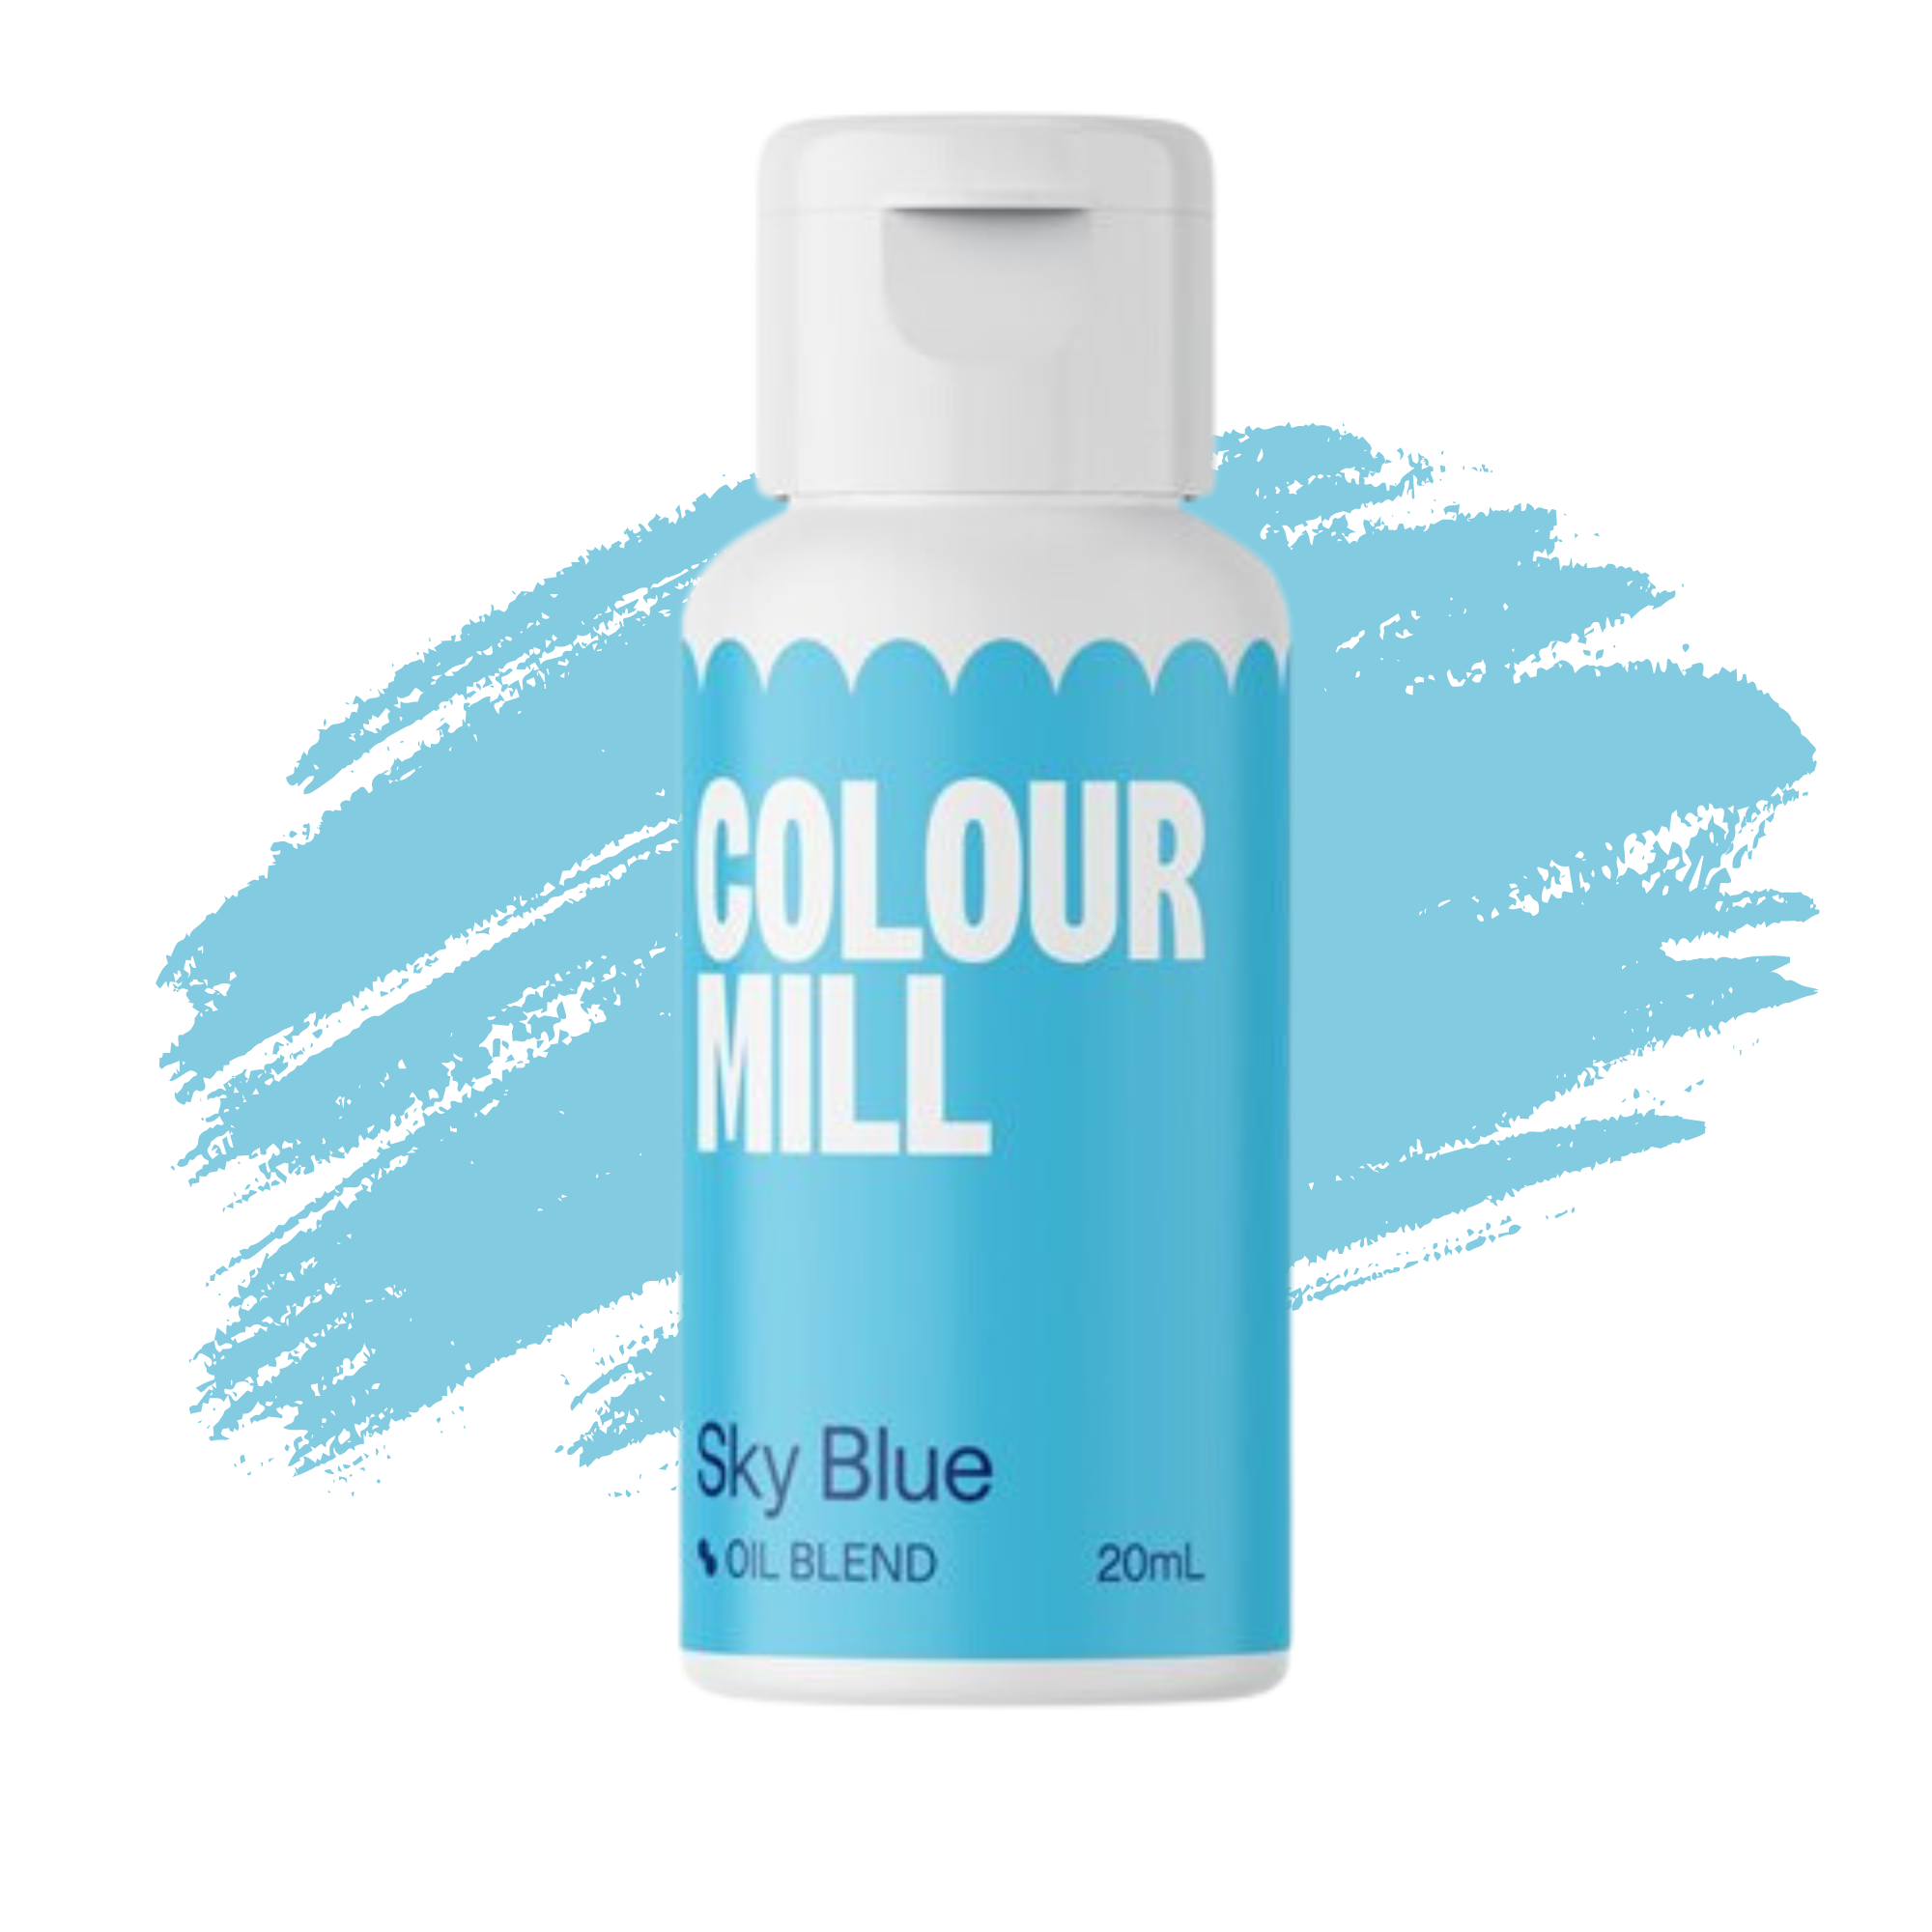 Colour Mill Sky Blue Food Colouring, Oil Based Food Colouring, Blue Food Colouring